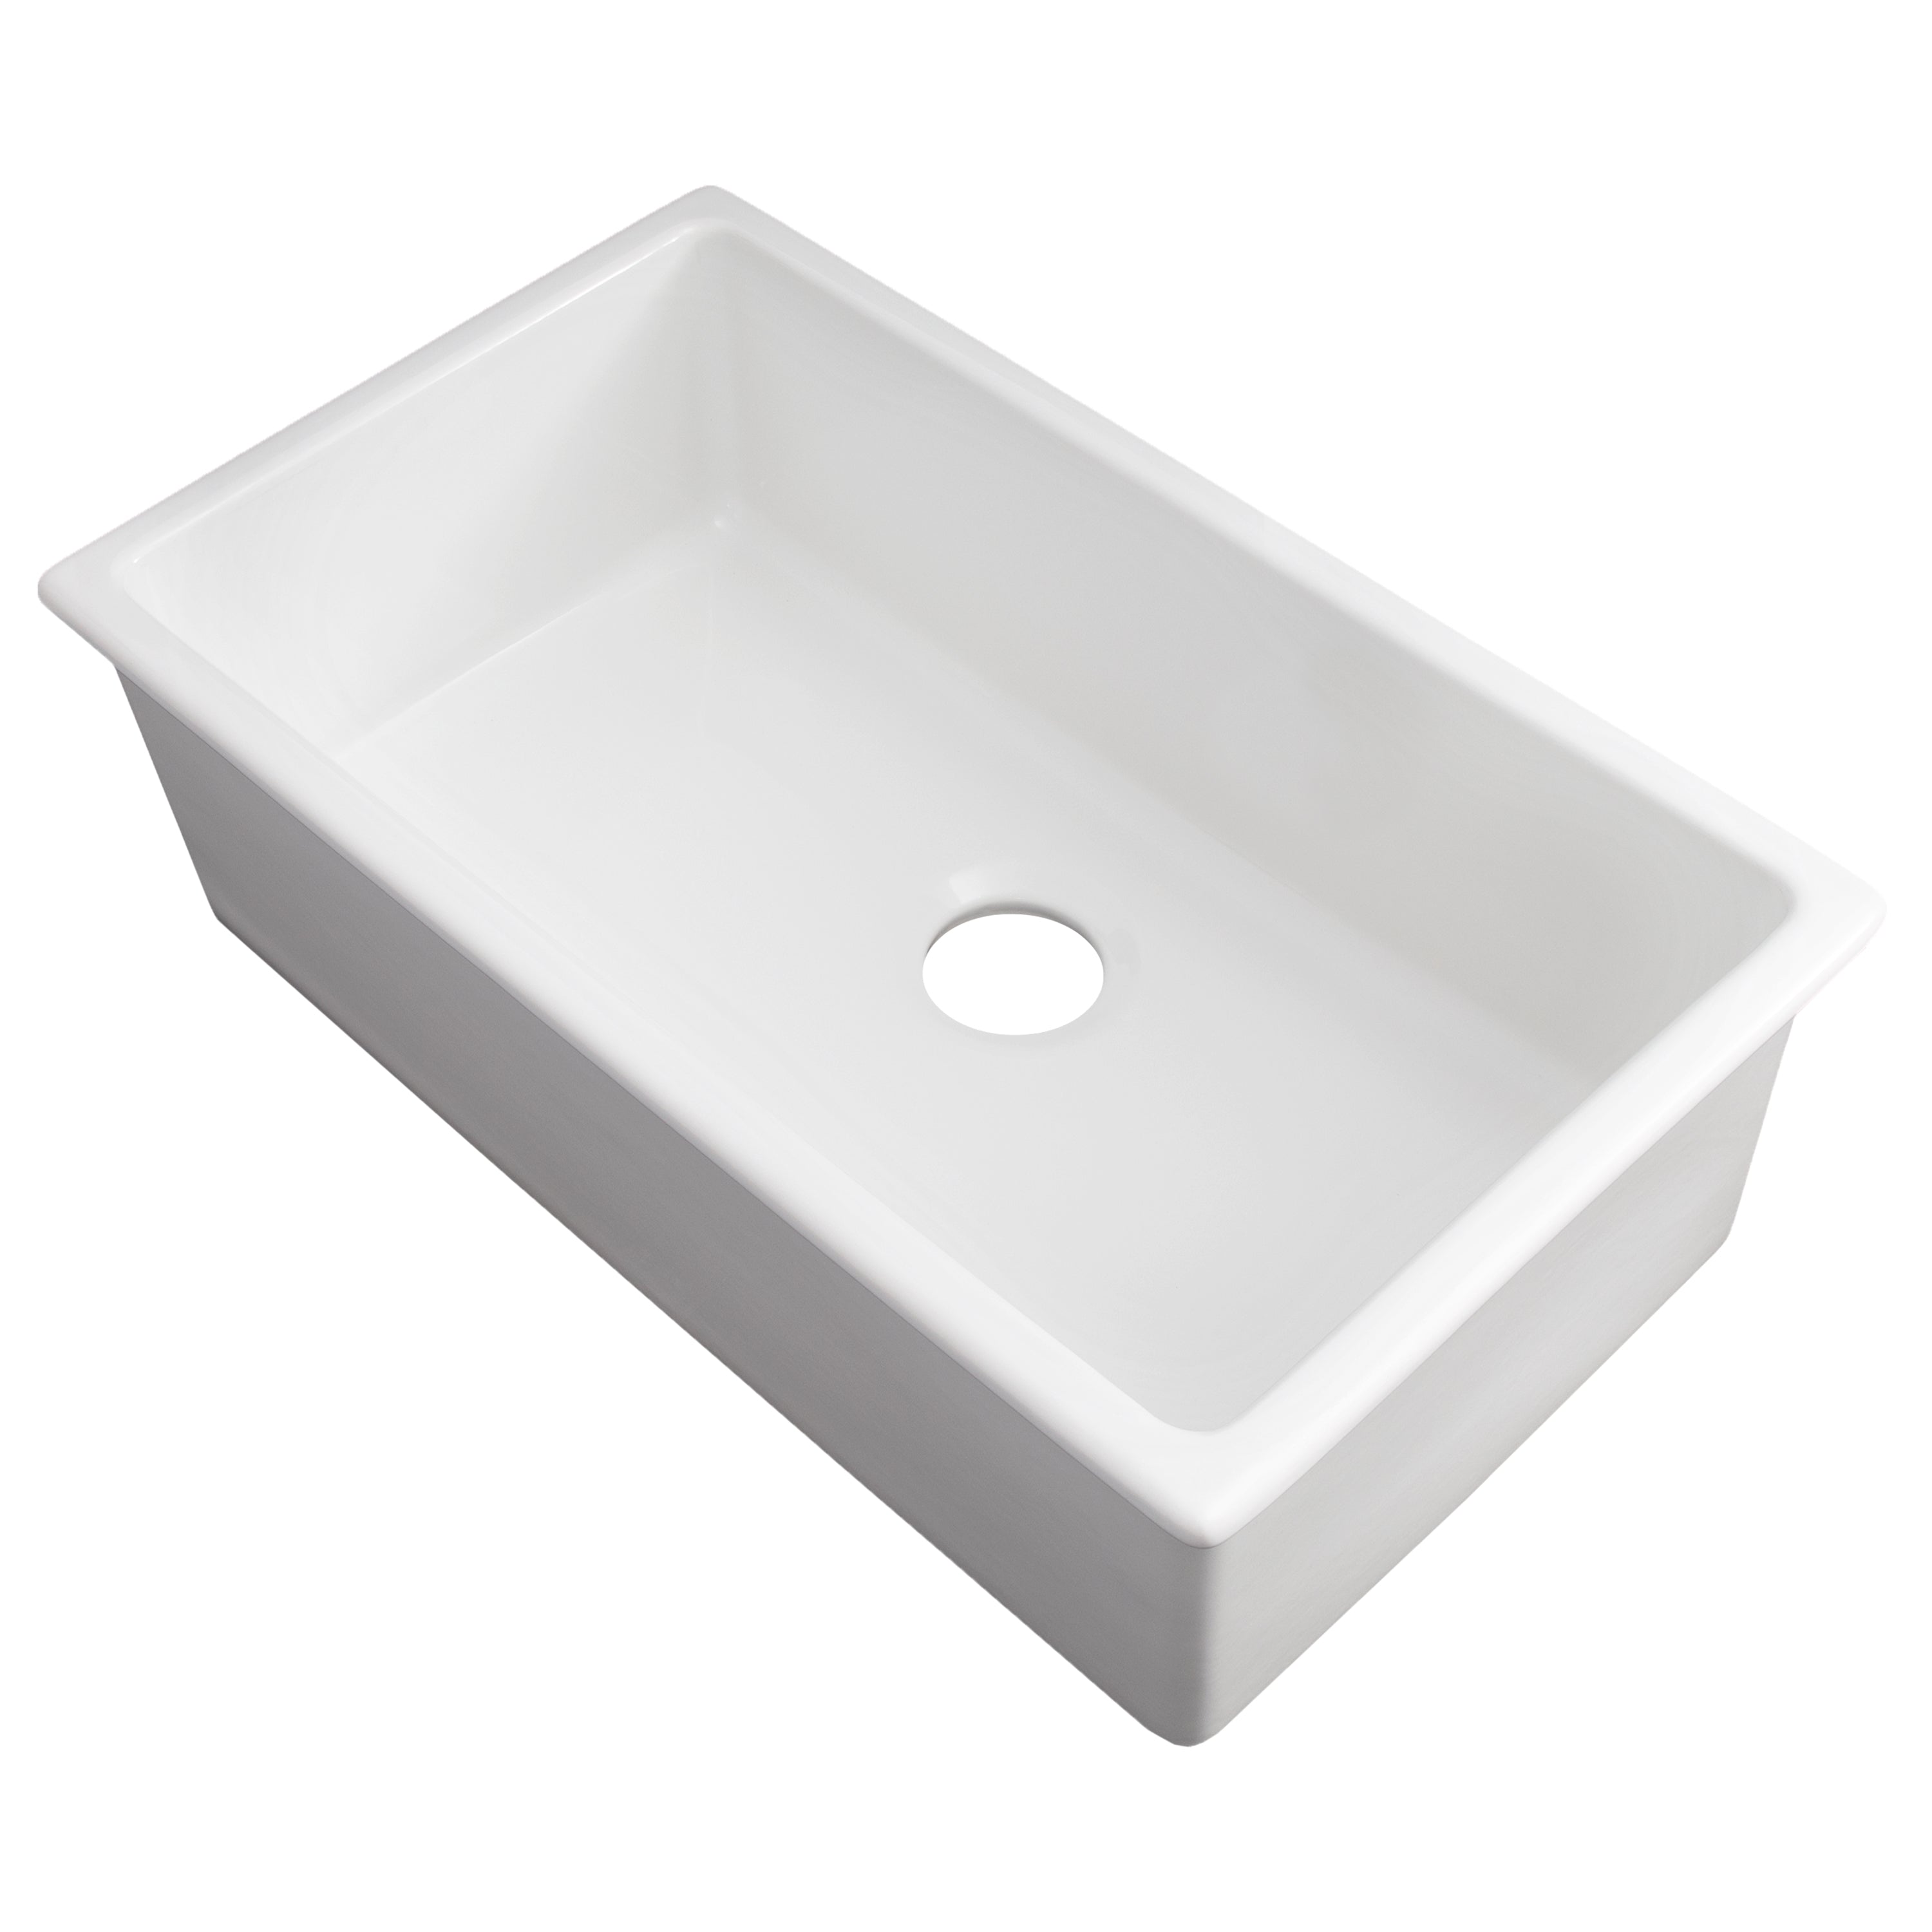 ZLINE 30" Rome Dual Mount Single Bowl Fireclay Kitchen Sink with Bottom Grid in White Gloss (FRC5124-WH-30)